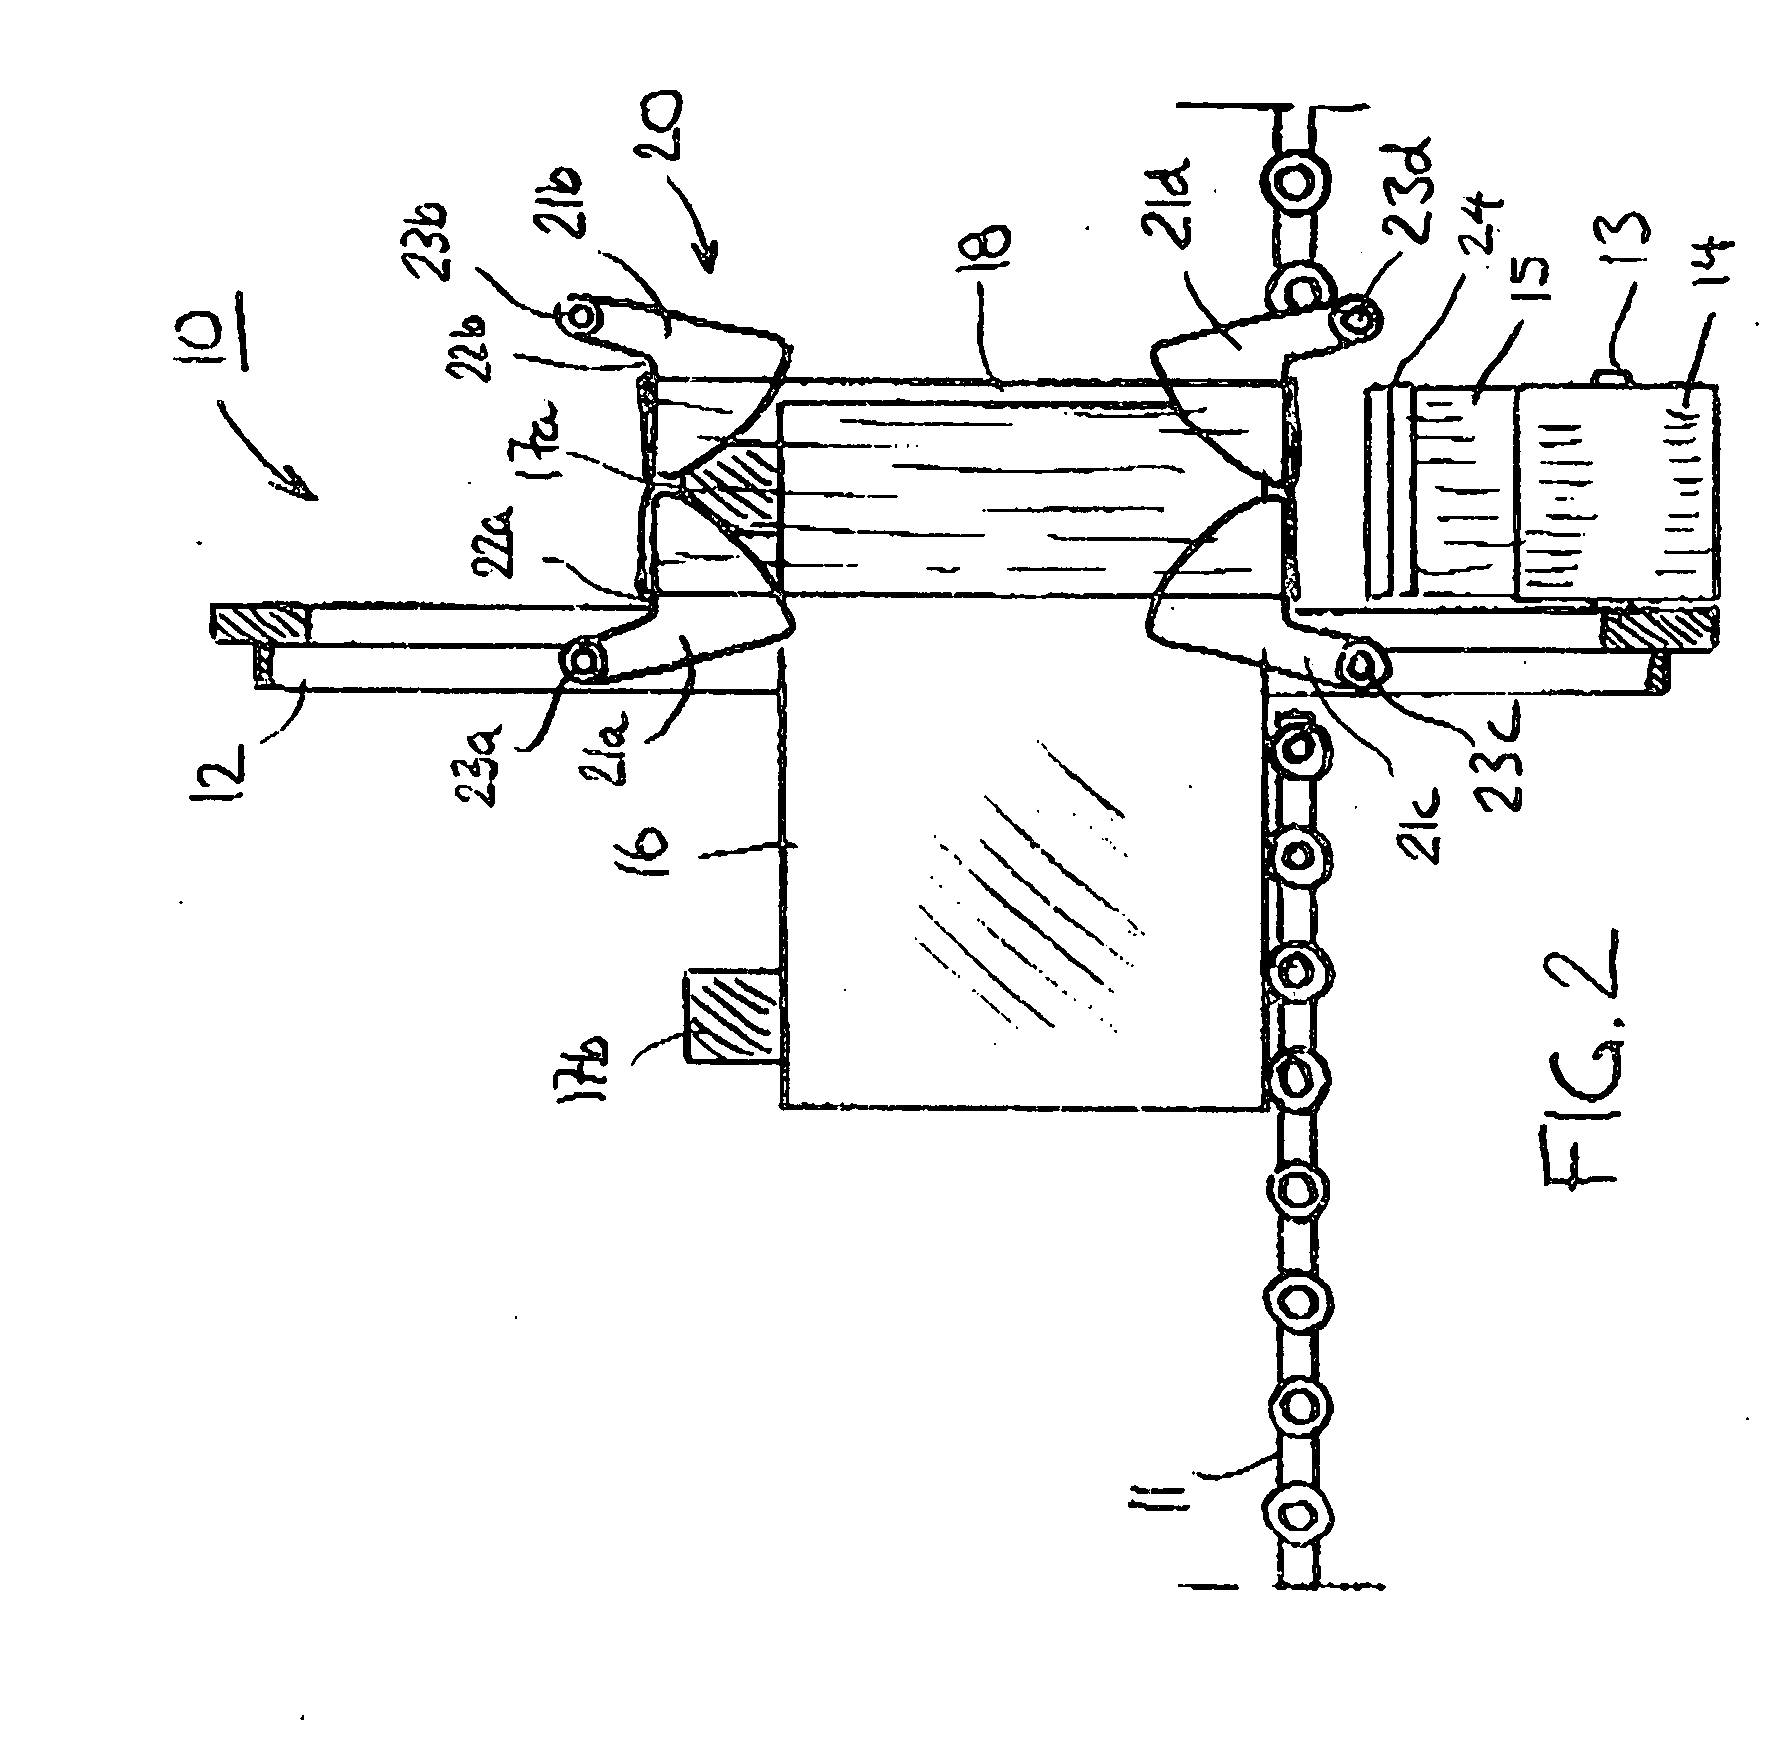 Method and device for applying a plastic film around a product to be packaged